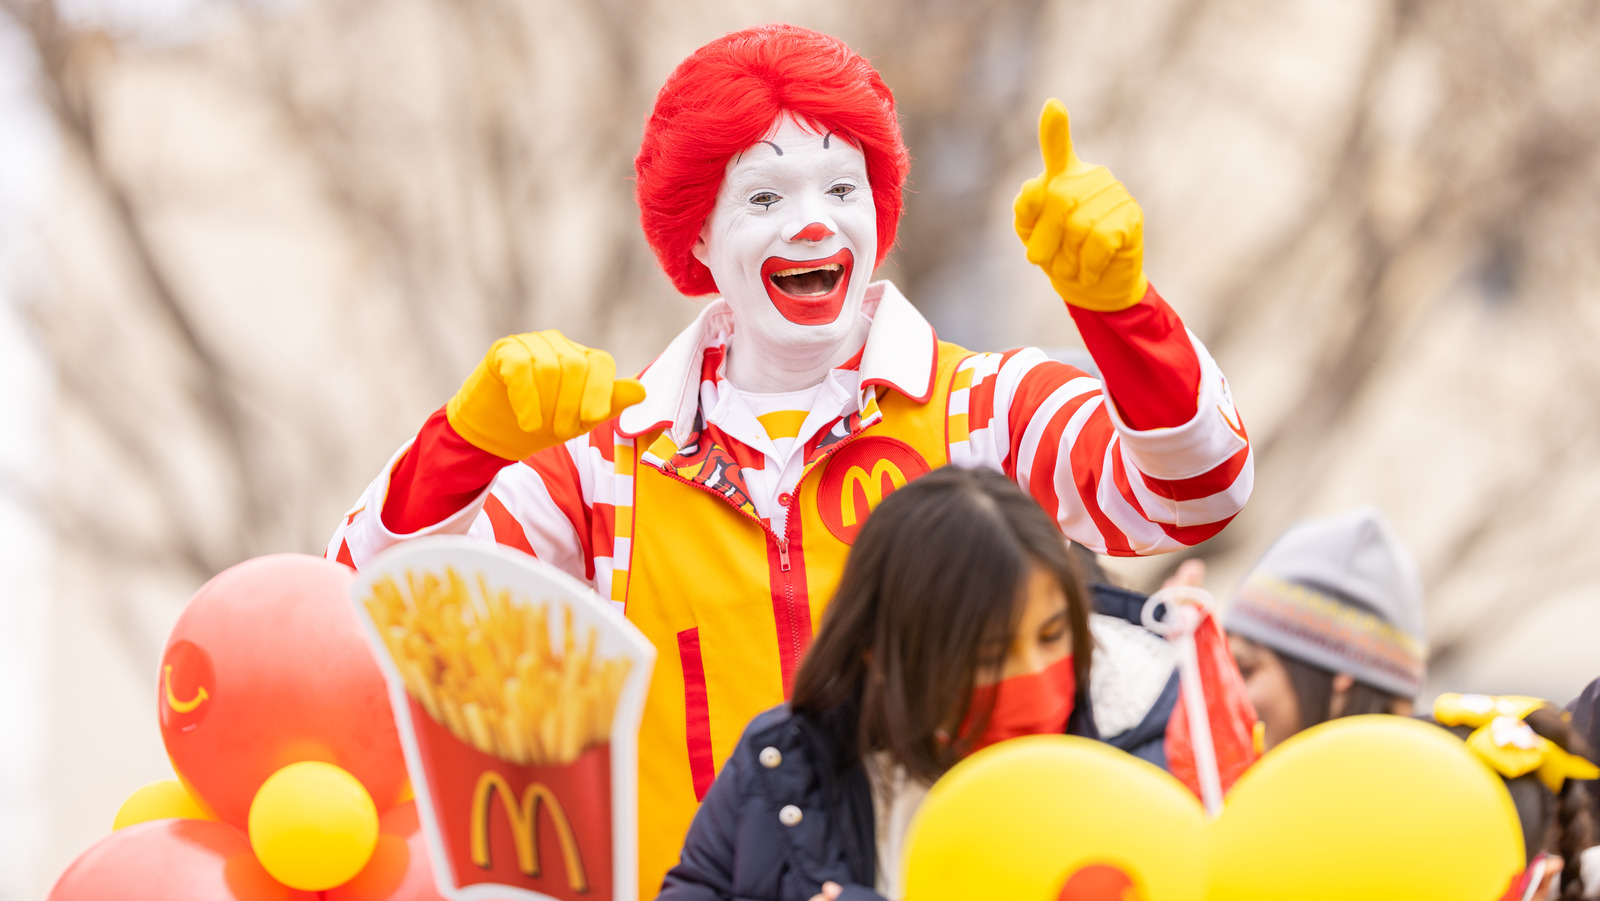 The Complete List Of Actors Who Played Ronald McDonald